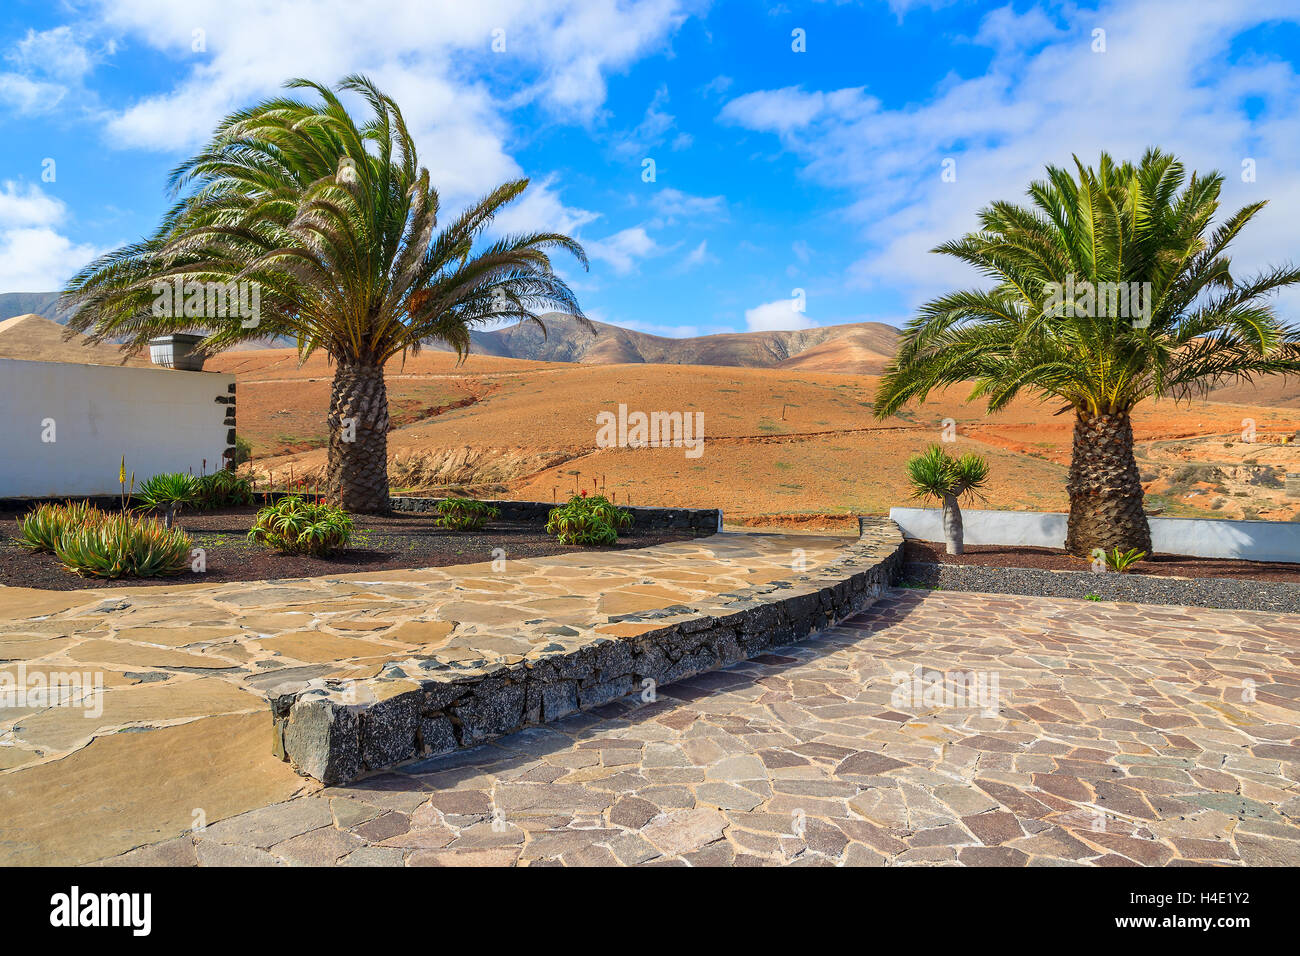 Palm trees on village square in volcanic mountain landscape of Fuerteventura island, Spain Stock Photo